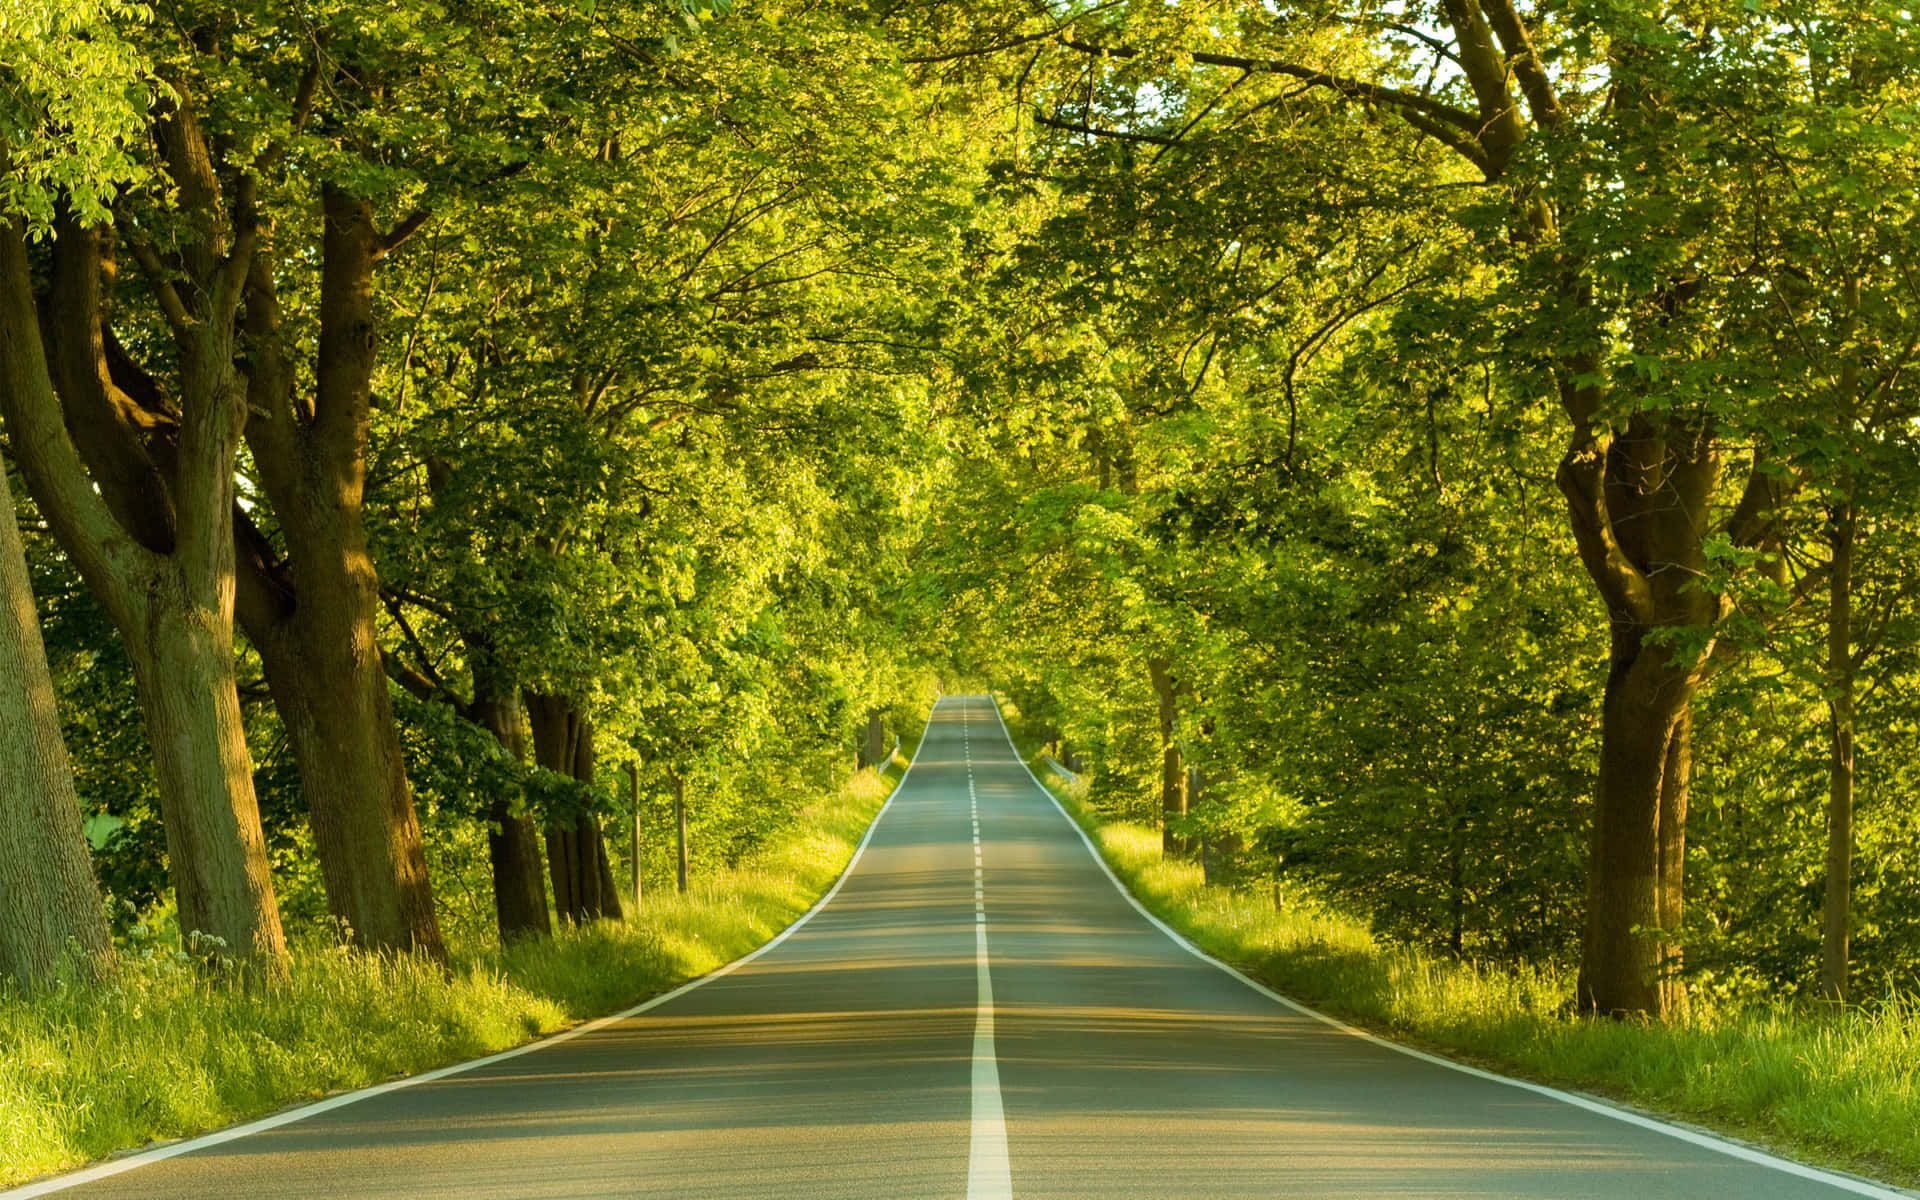 Road With Trees Nature Landscape Picture